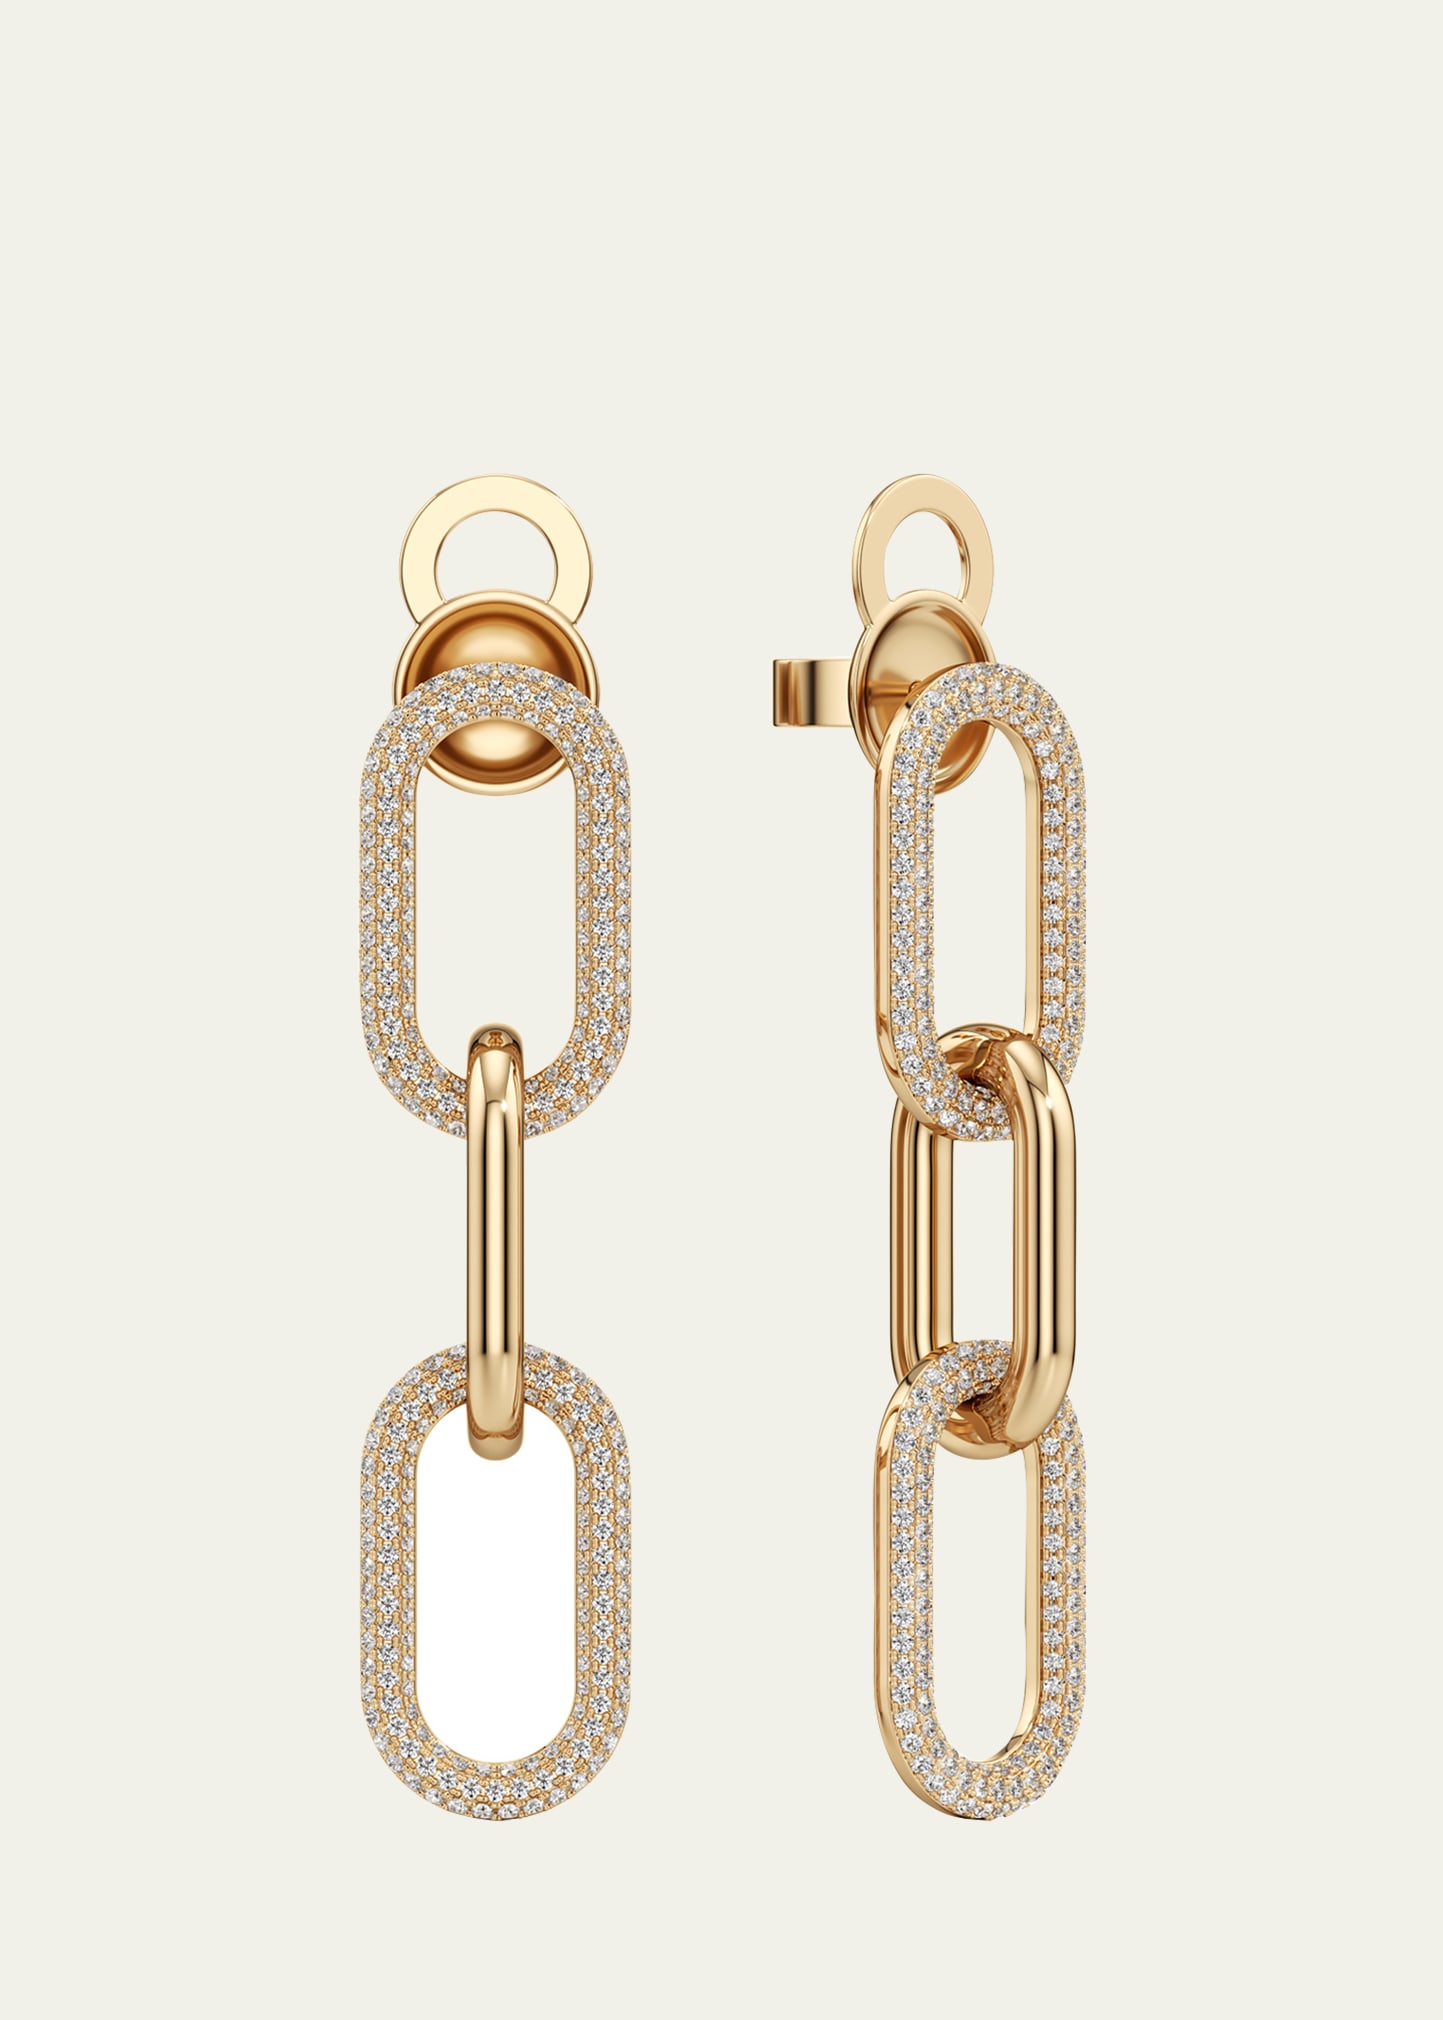 Connect Collection Three-Link Pave Diamond Earrings in 18K Yellow Gold